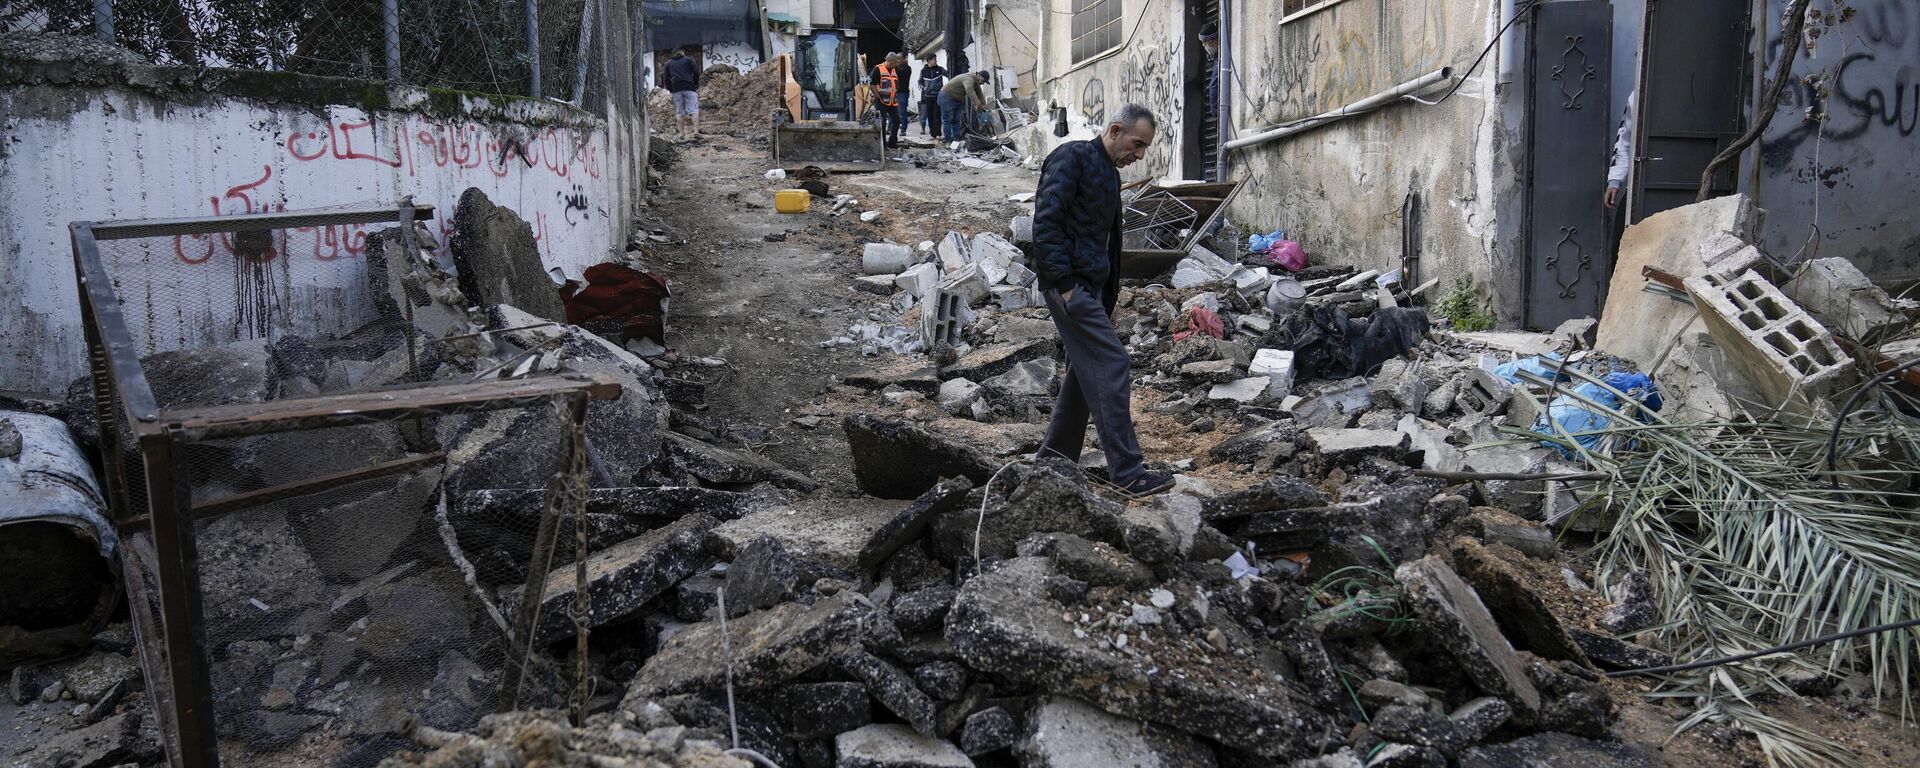 Palestinians walk through the aftermath of the Israeli military raid on Nur Shams refugee camp in the West Bank, Wednesday, Dec. 27, 2023. Israel's forces raided a refugee camp in the northern occupied West Bank, killing at least six Palestinians, Palestinian health authorities said early Wednesday. - Sputnik International, 1920, 28.12.2023